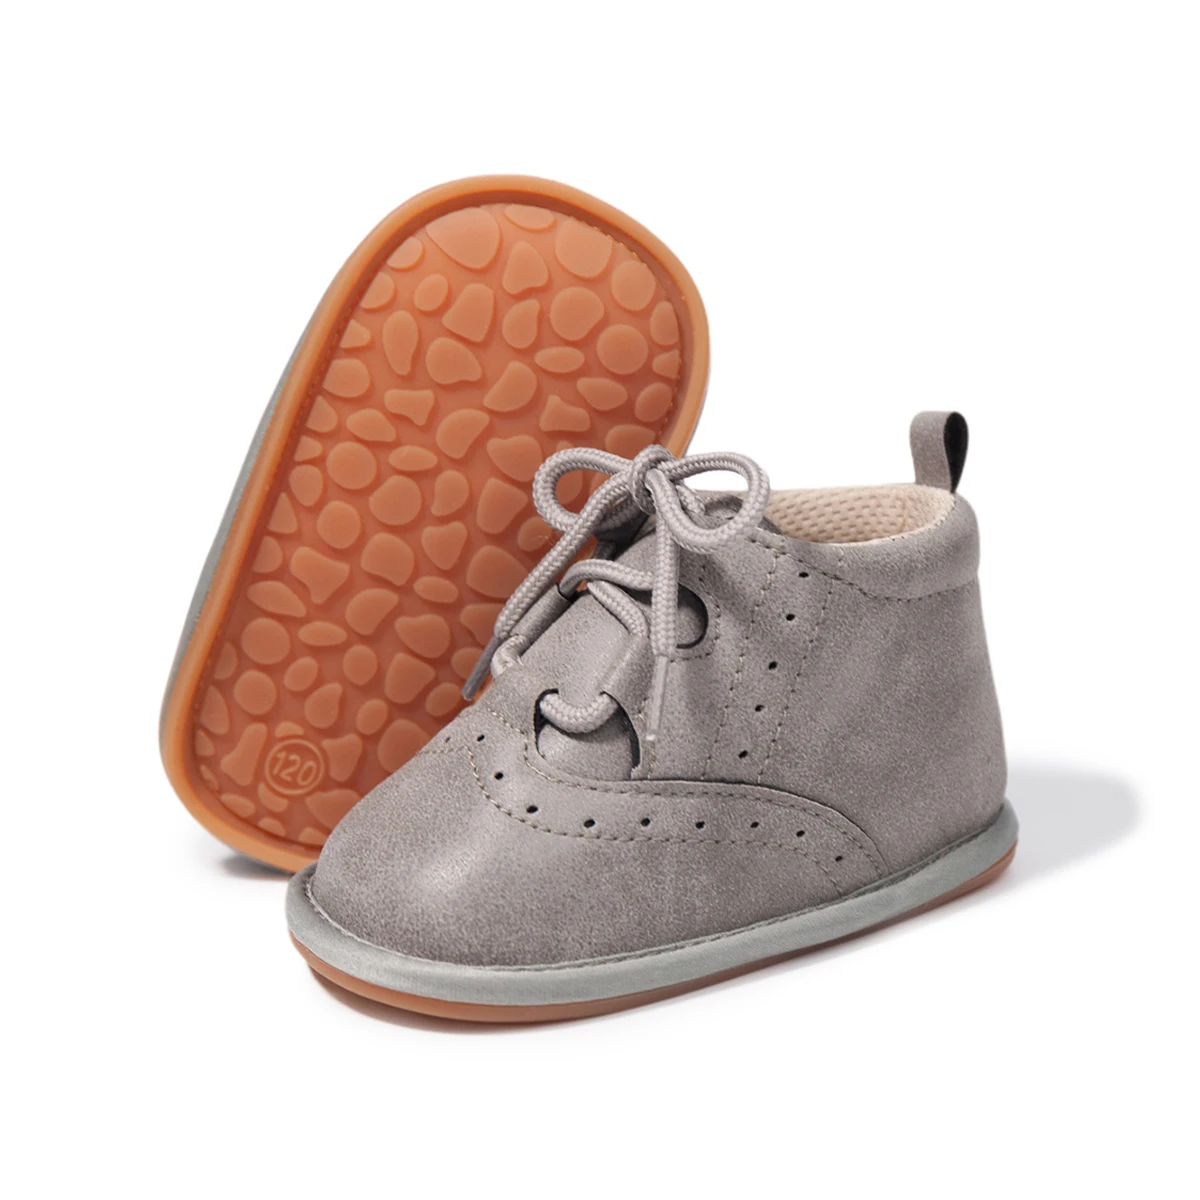 Moq 1 Quick Shipping Outdoor Baby Shoes Warm Winter Anti-slip Sole Suede Baby Boots - Buy Boot Or Baby Unique,Toddler Boots,Baby Booties Organic on Alibaba.com